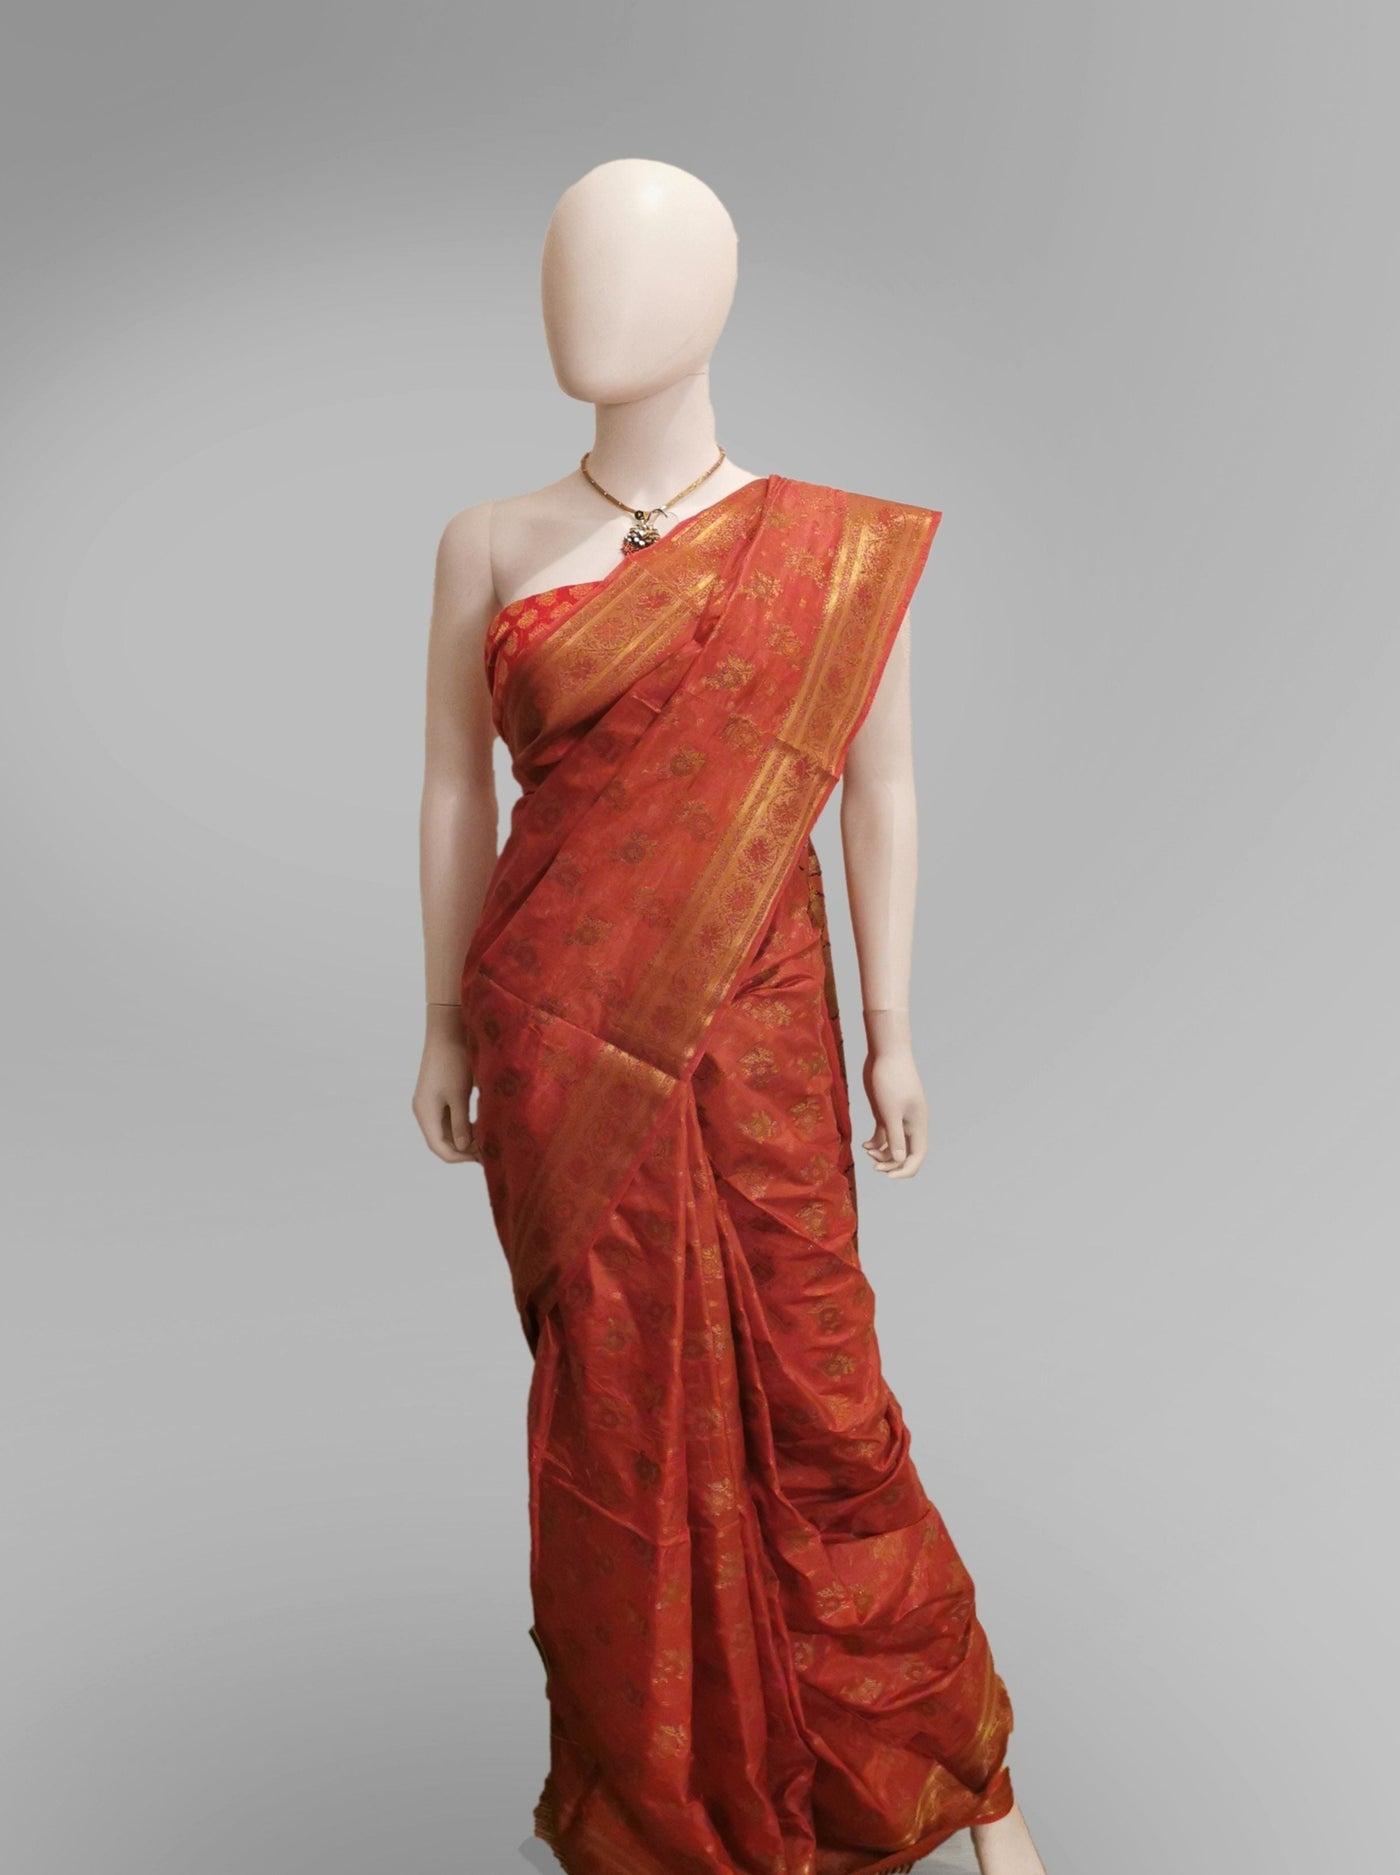 Saree in Chili Red Silk with Traditional Embroidery Work - Indian Clothing in Denver, CO, Aurora, CO, Boulder, CO, Fort Collins, CO, Colorado Springs, CO, Parker, CO, Highlands Ranch, CO, Cherry Creek, CO, Centennial, CO, and Longmont, CO. Nationwide shipping USA - India Fashion X